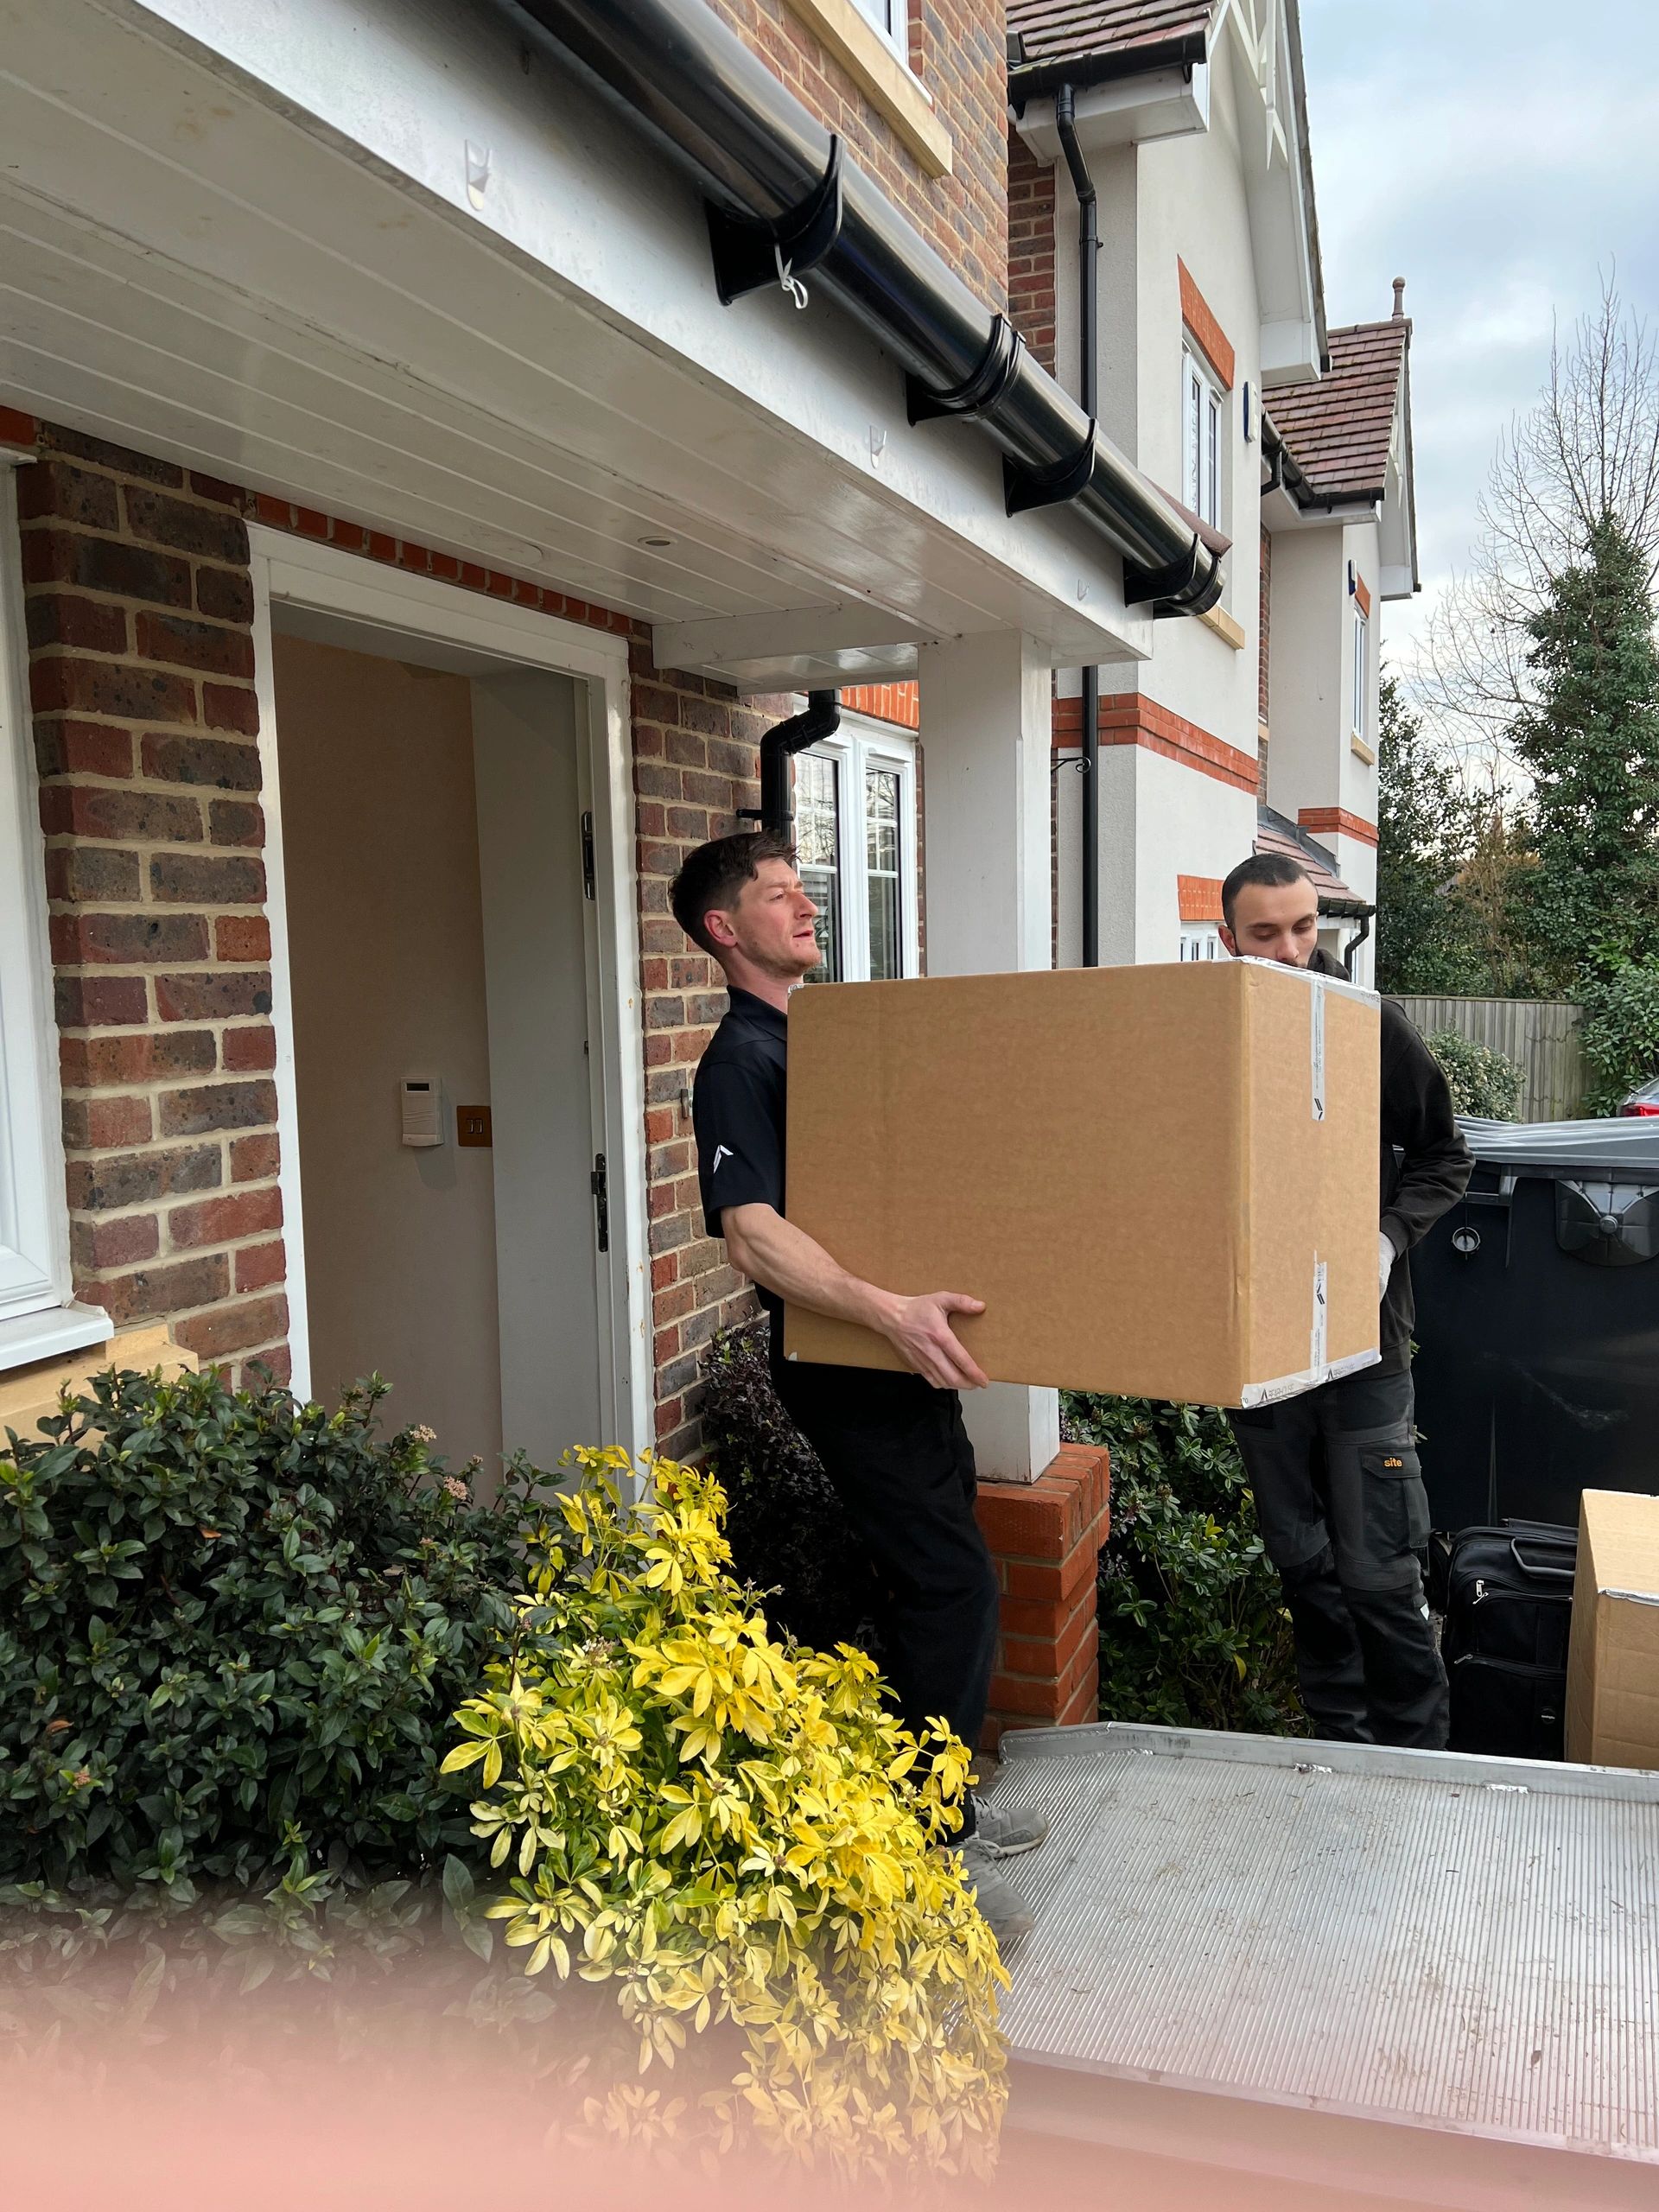 home moves
man and van
delivery service
house move